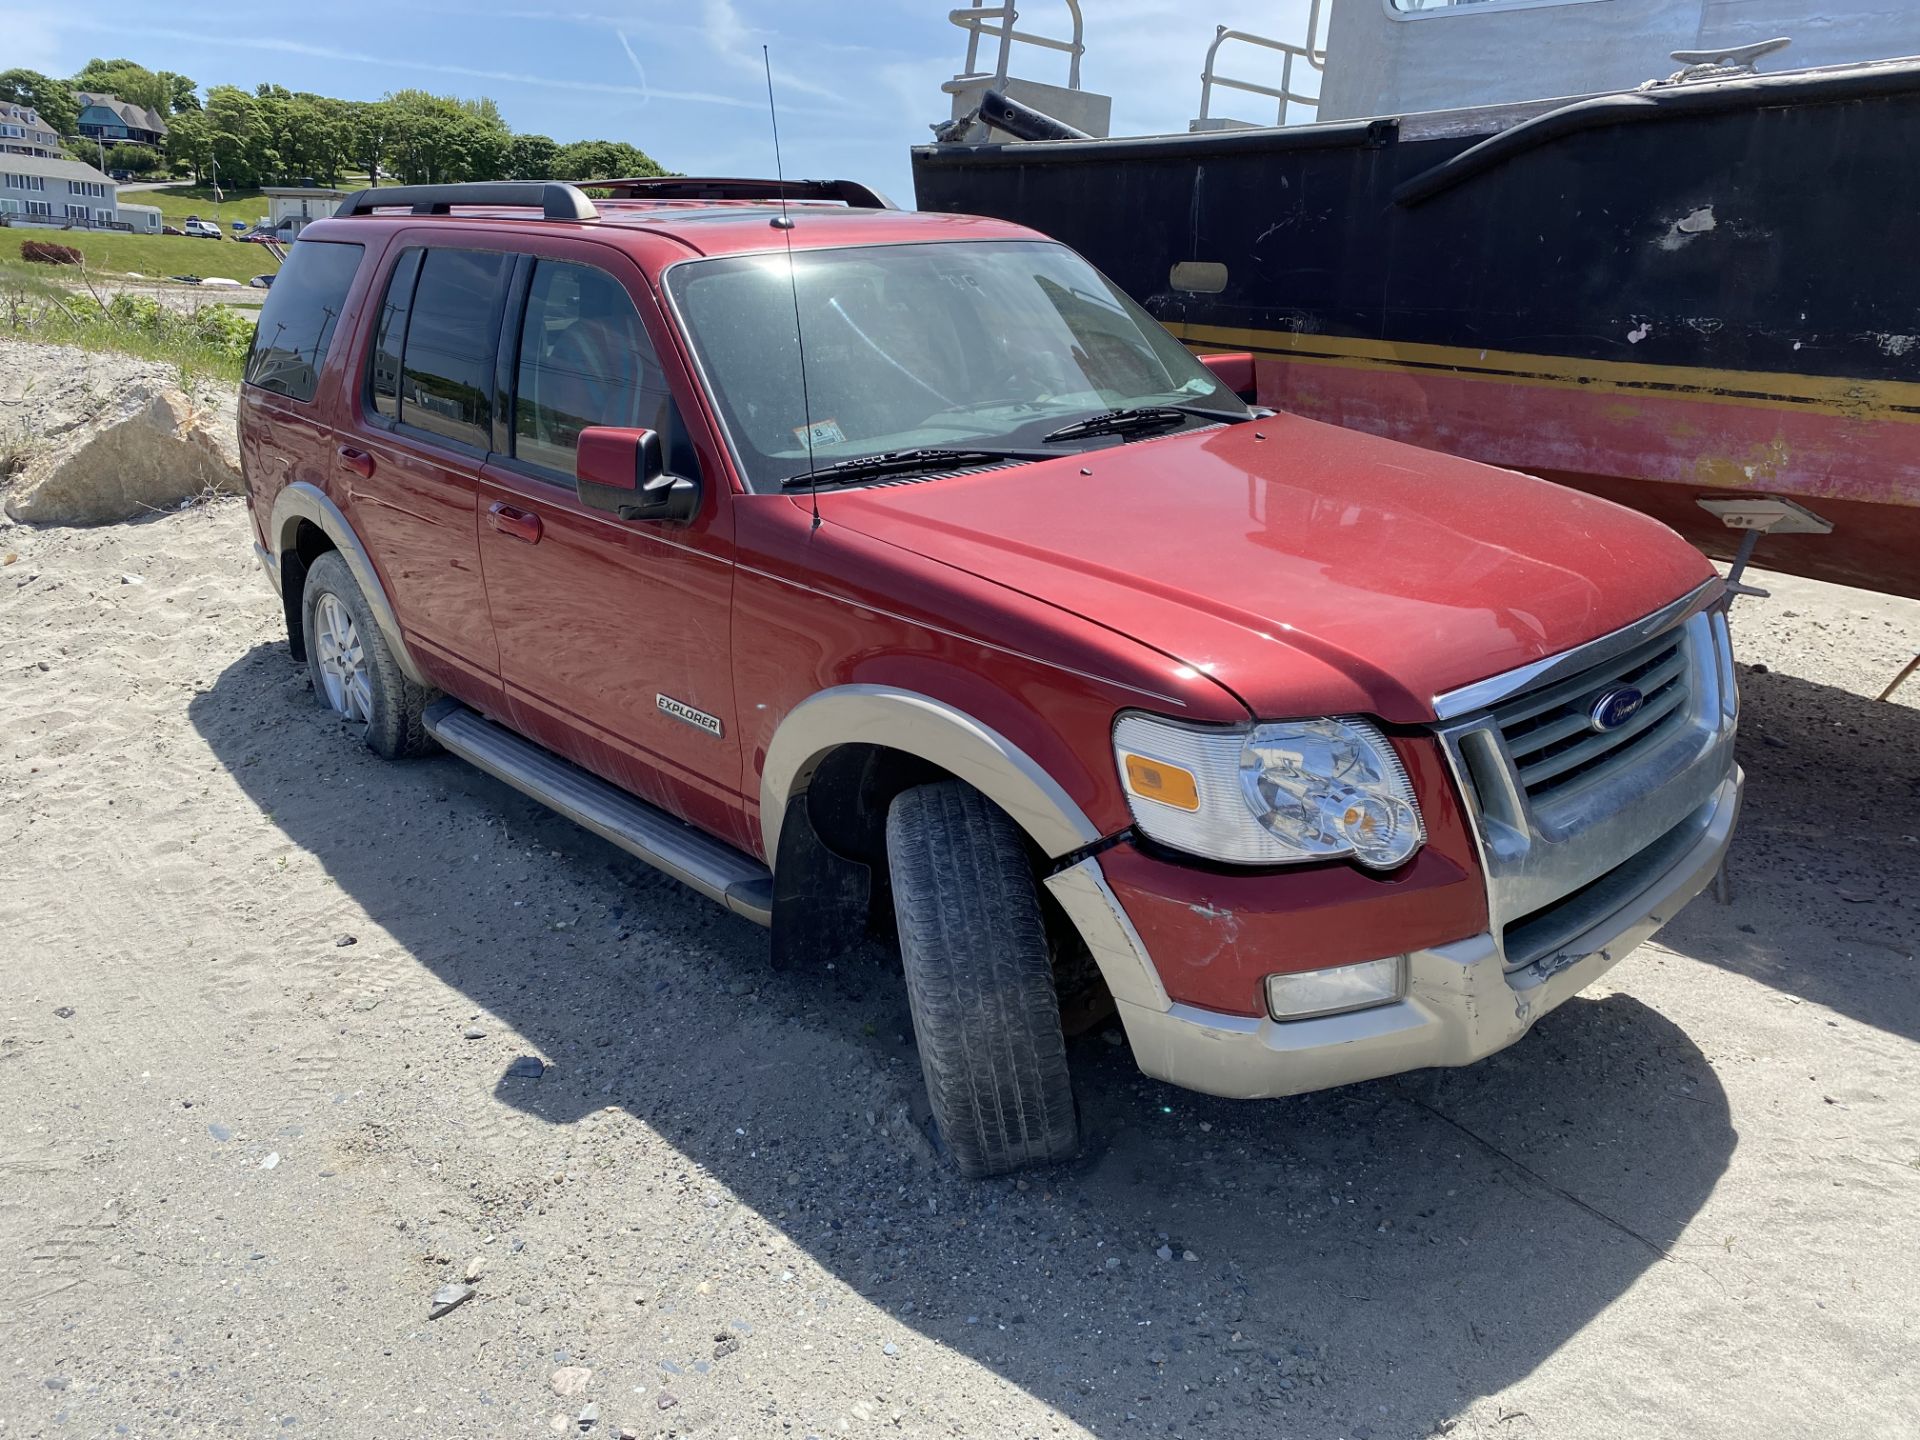 2008 Ford Explorer Eddie Bauer Edition, 4 x 4, Leather, Glass Roof, Ocean Salvage Vehicle w/